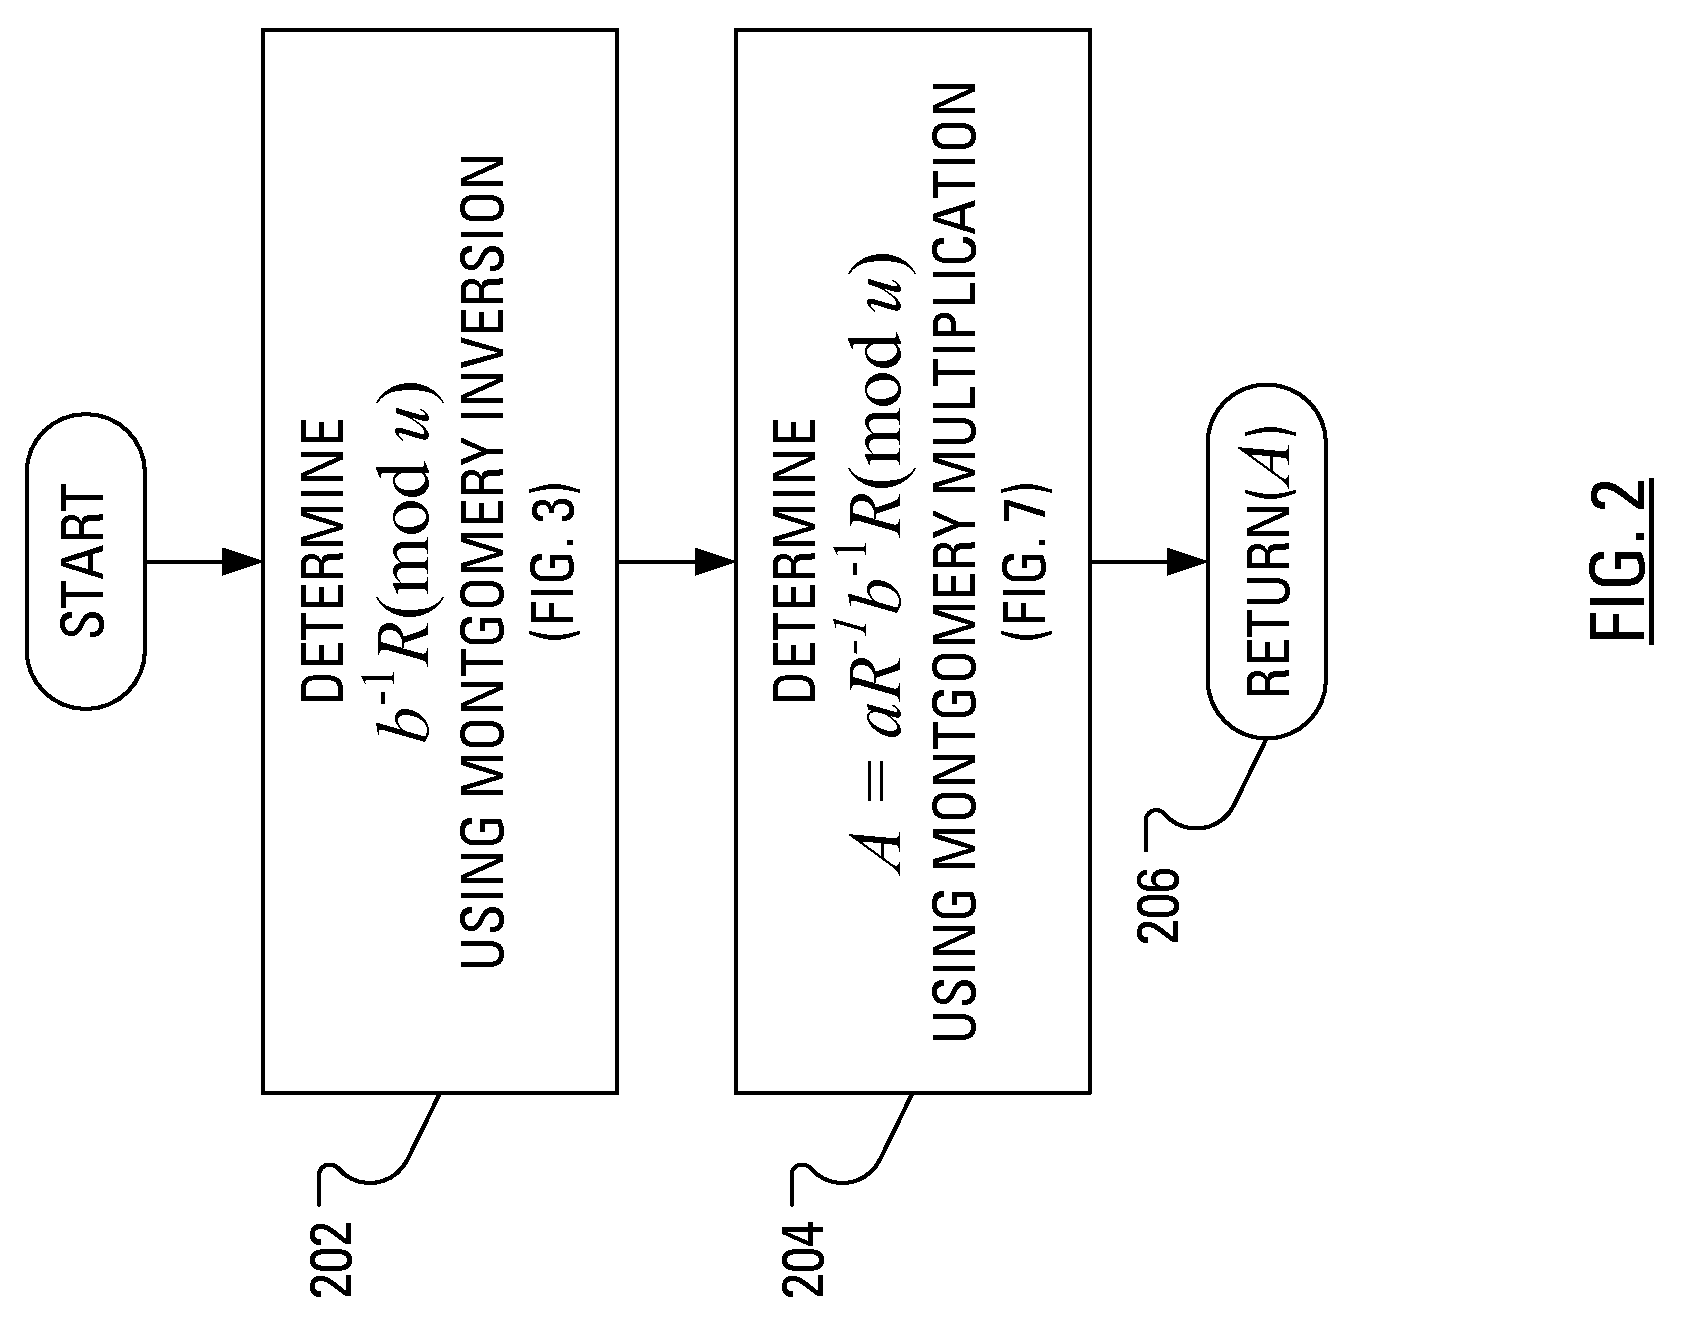 Method and apparatus for performing elliptic curve scalar multiplication in a manner that counters power analysis attacks